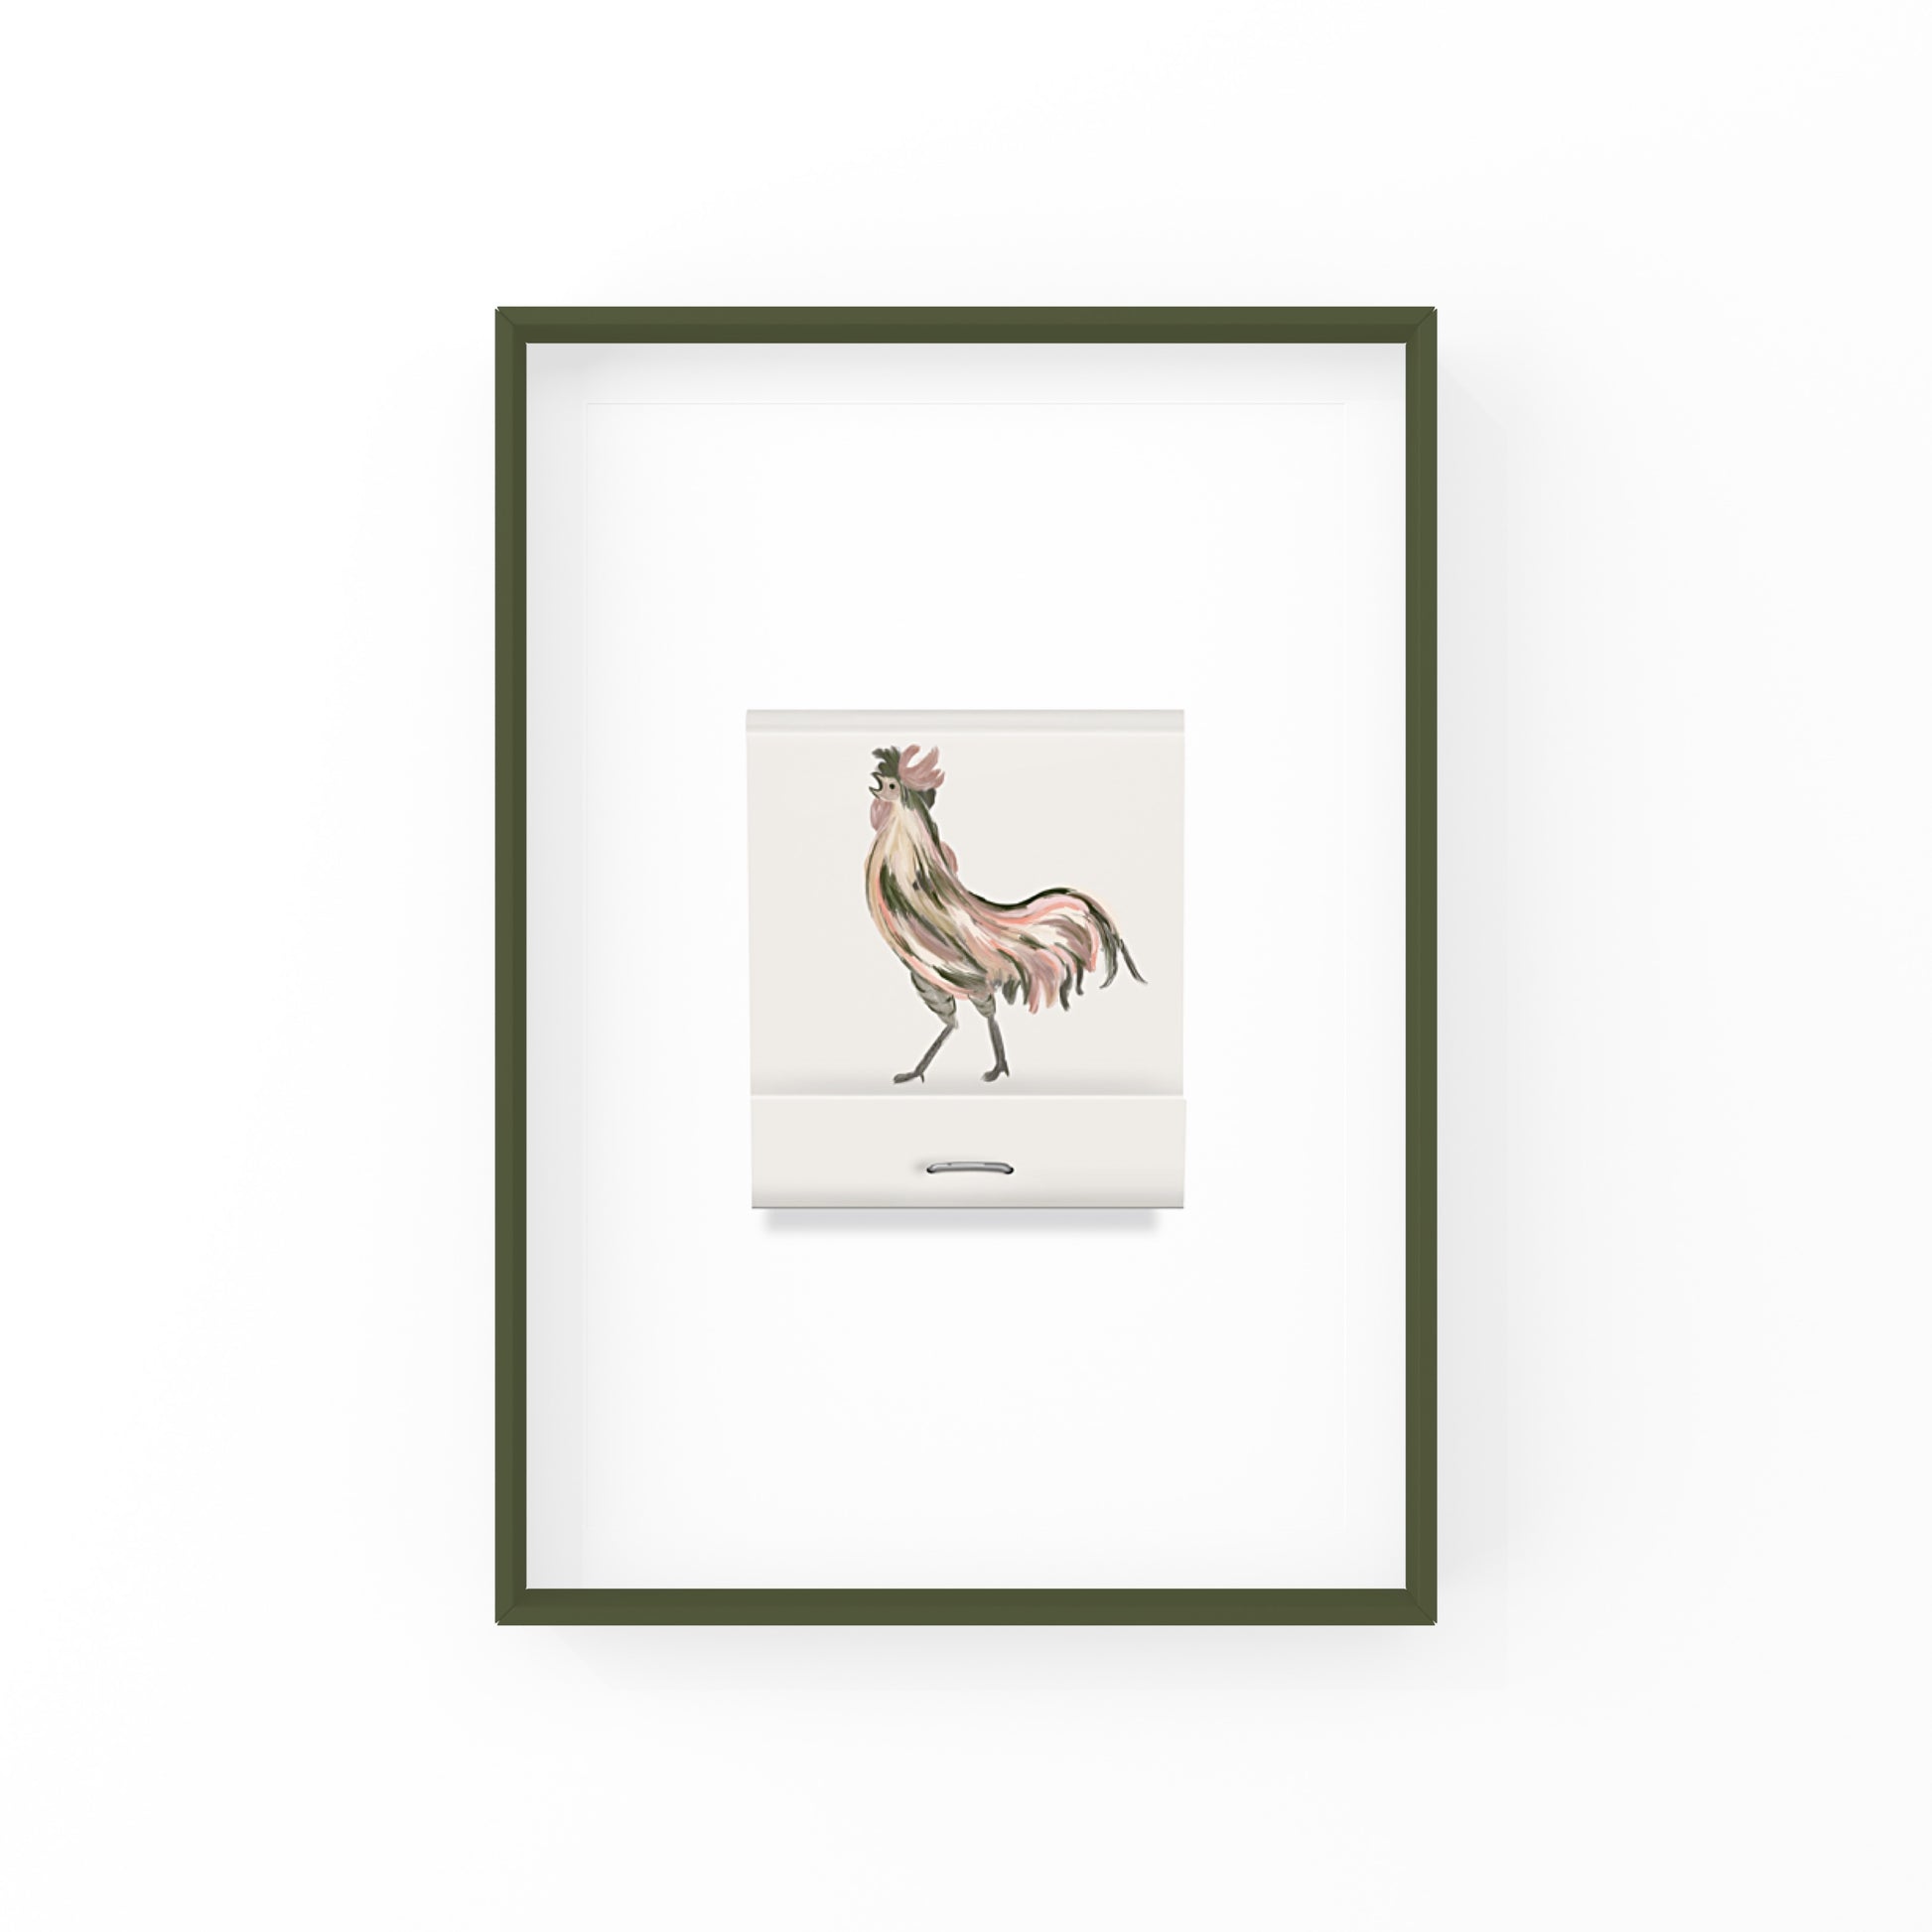 This matchbook print is the perfect way to bring those southern vibes into your home! Featuring a beautifully hand-illustrated rooster.   This art print not only makes the perfect home decor, but it's also a thoughtful and unique housewarming/going away gift or birthday gift. It would go perfectly above a bar cart or in any gallery wall!